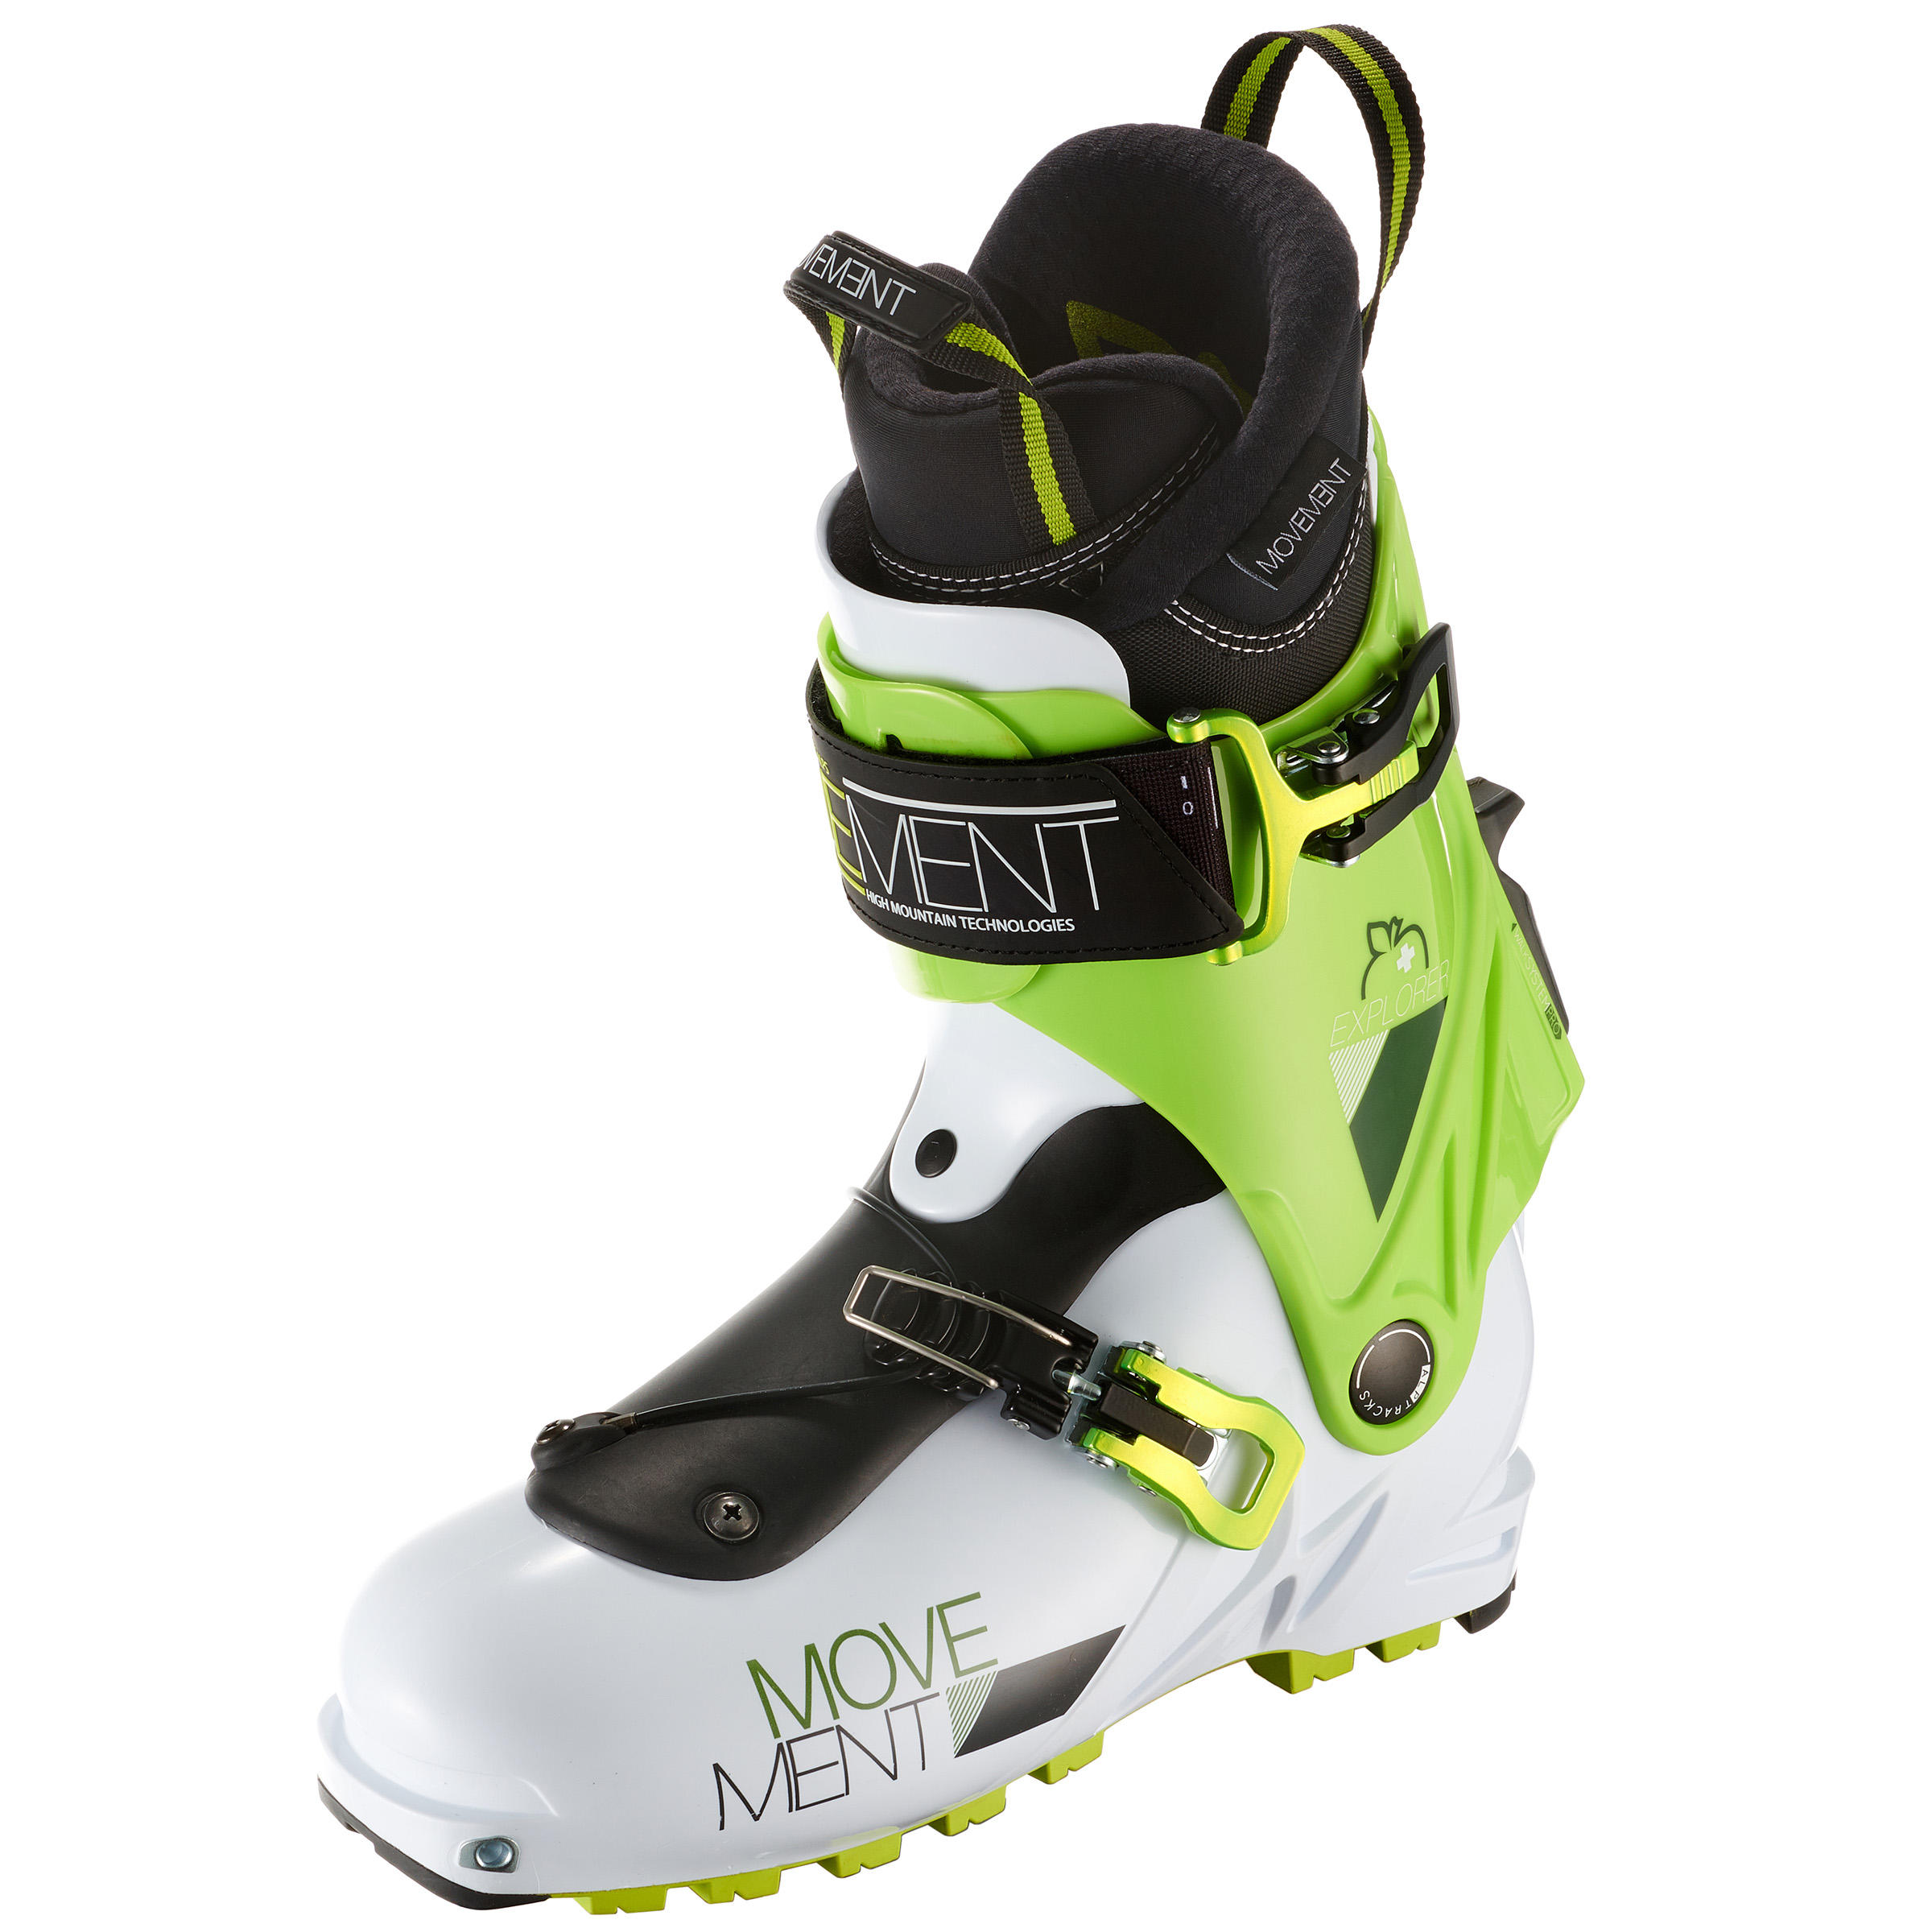 MOVEMENT Explorer Cross-Country Skiing Boots